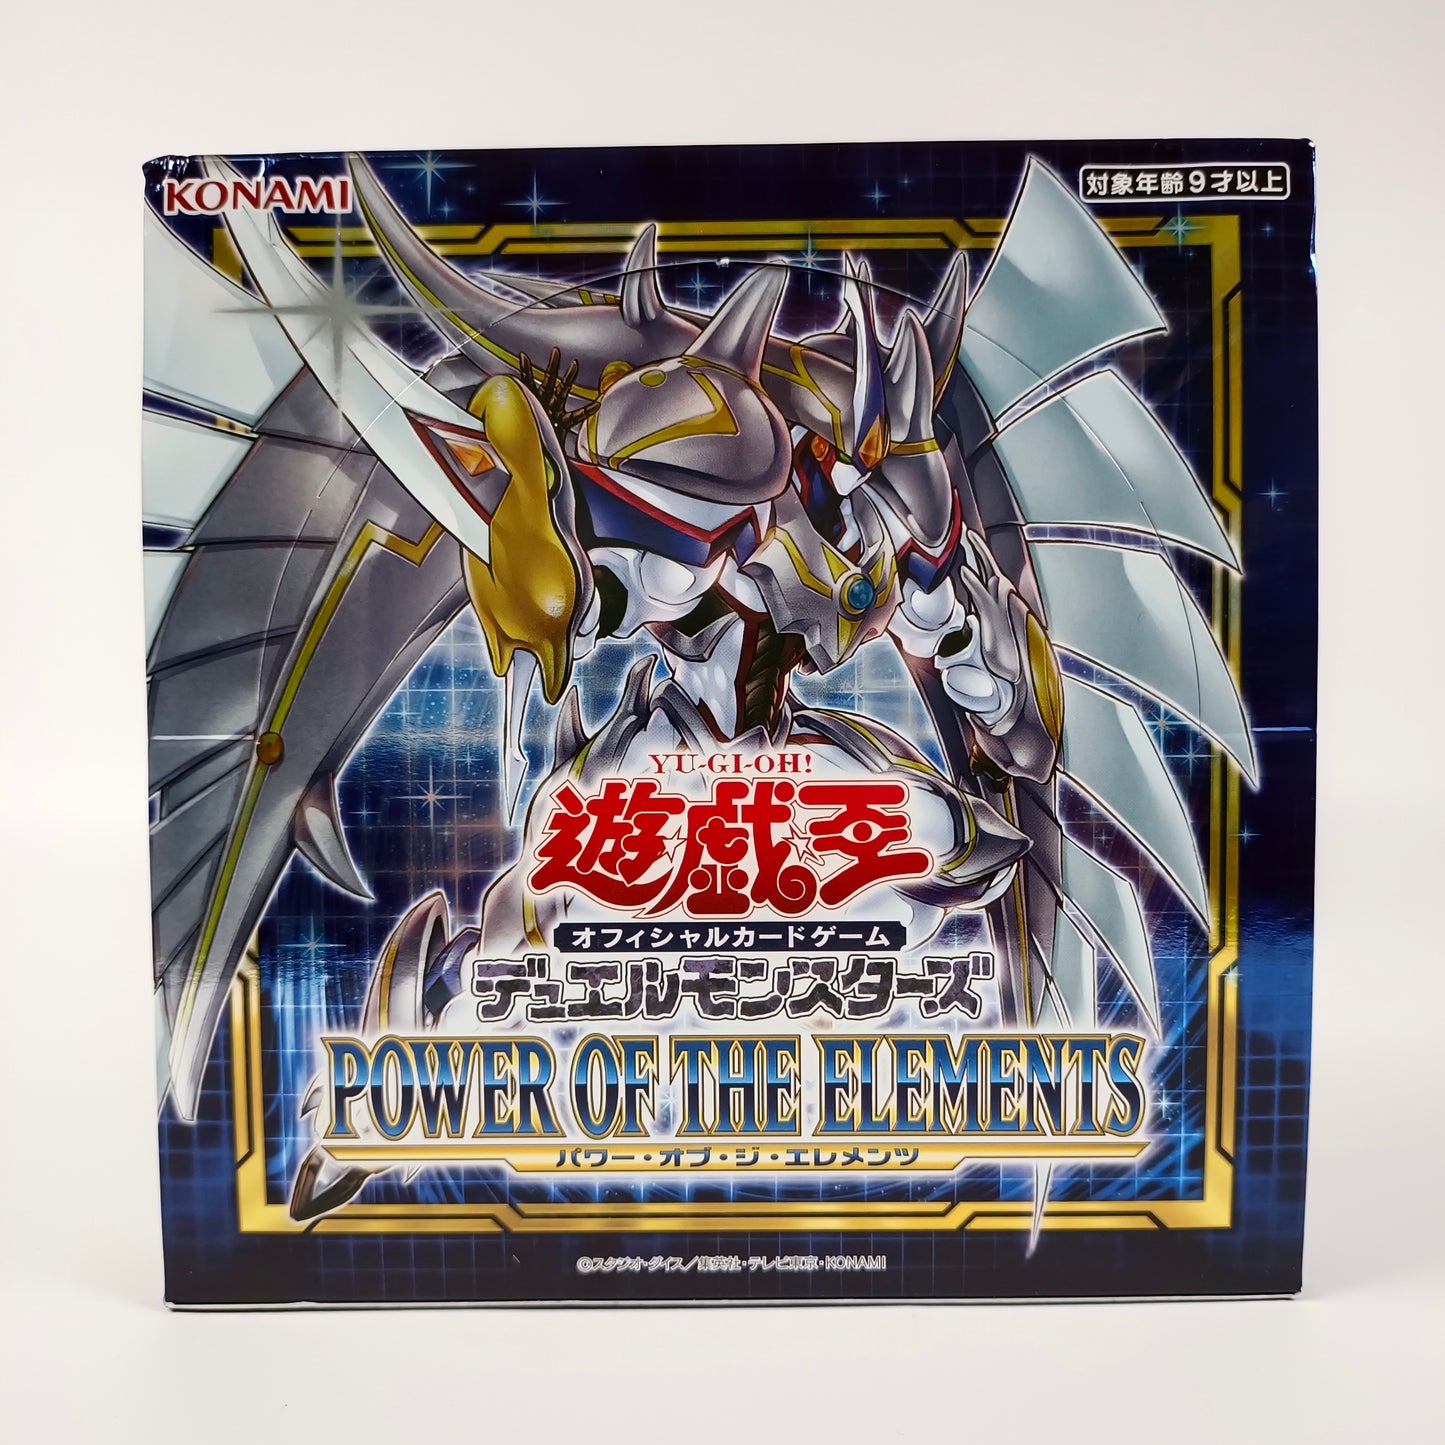 Yu-Gi-Oh! OCG DUEL MONSTERS POWER OF THE ELEMENTS BOX